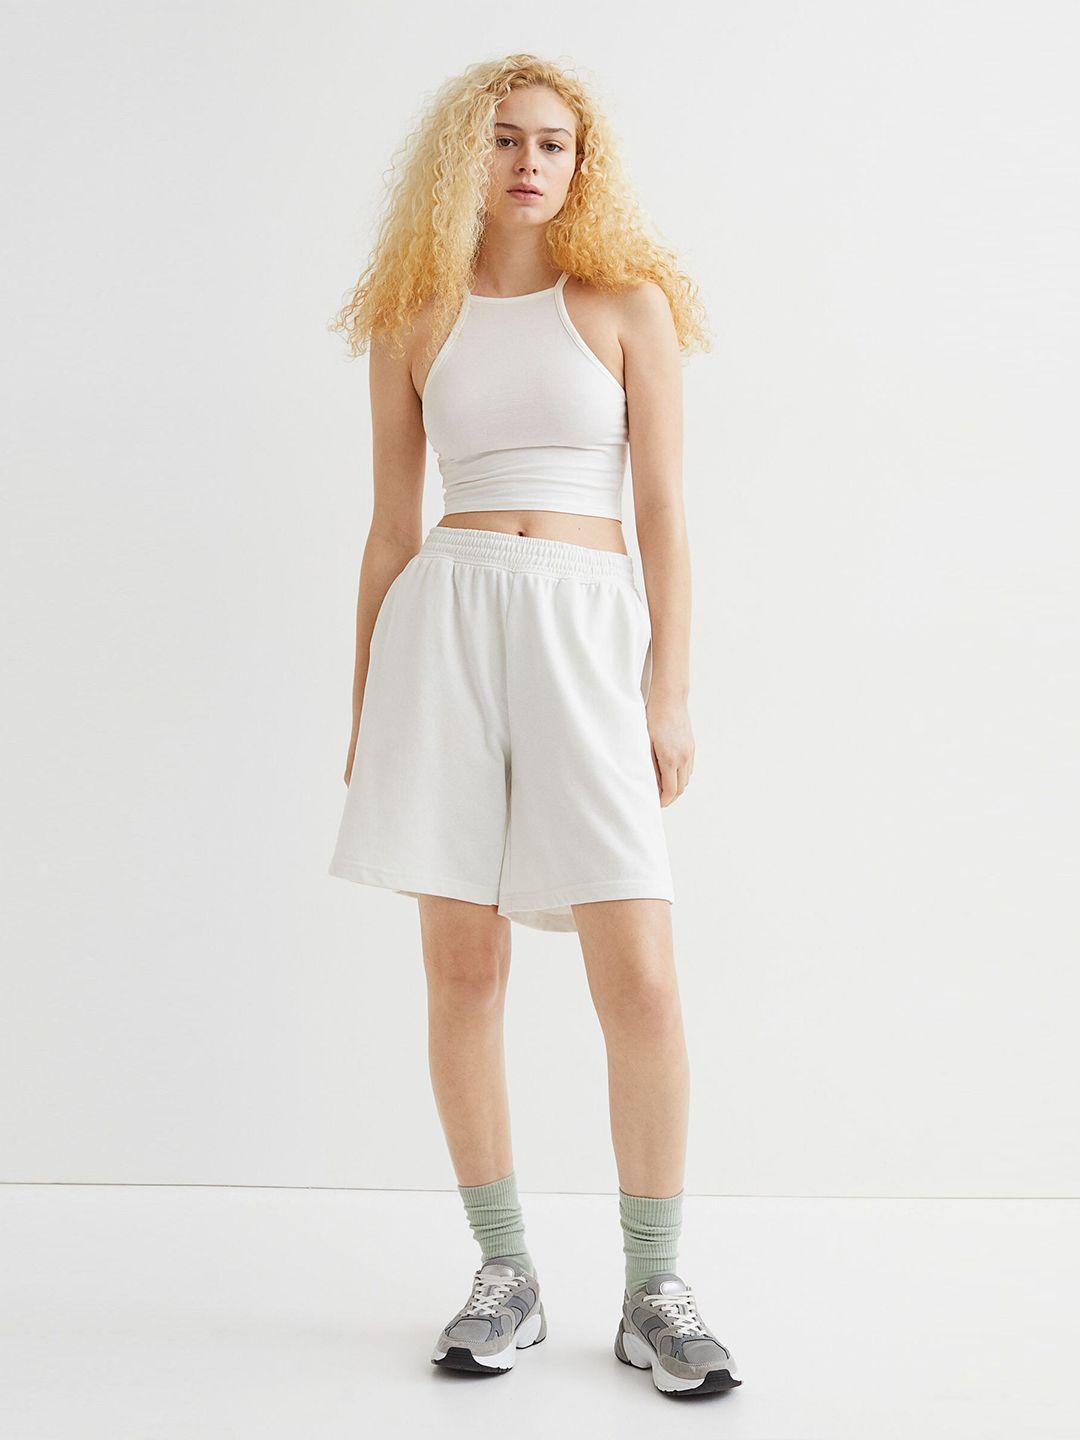 h&m white solid cropped top